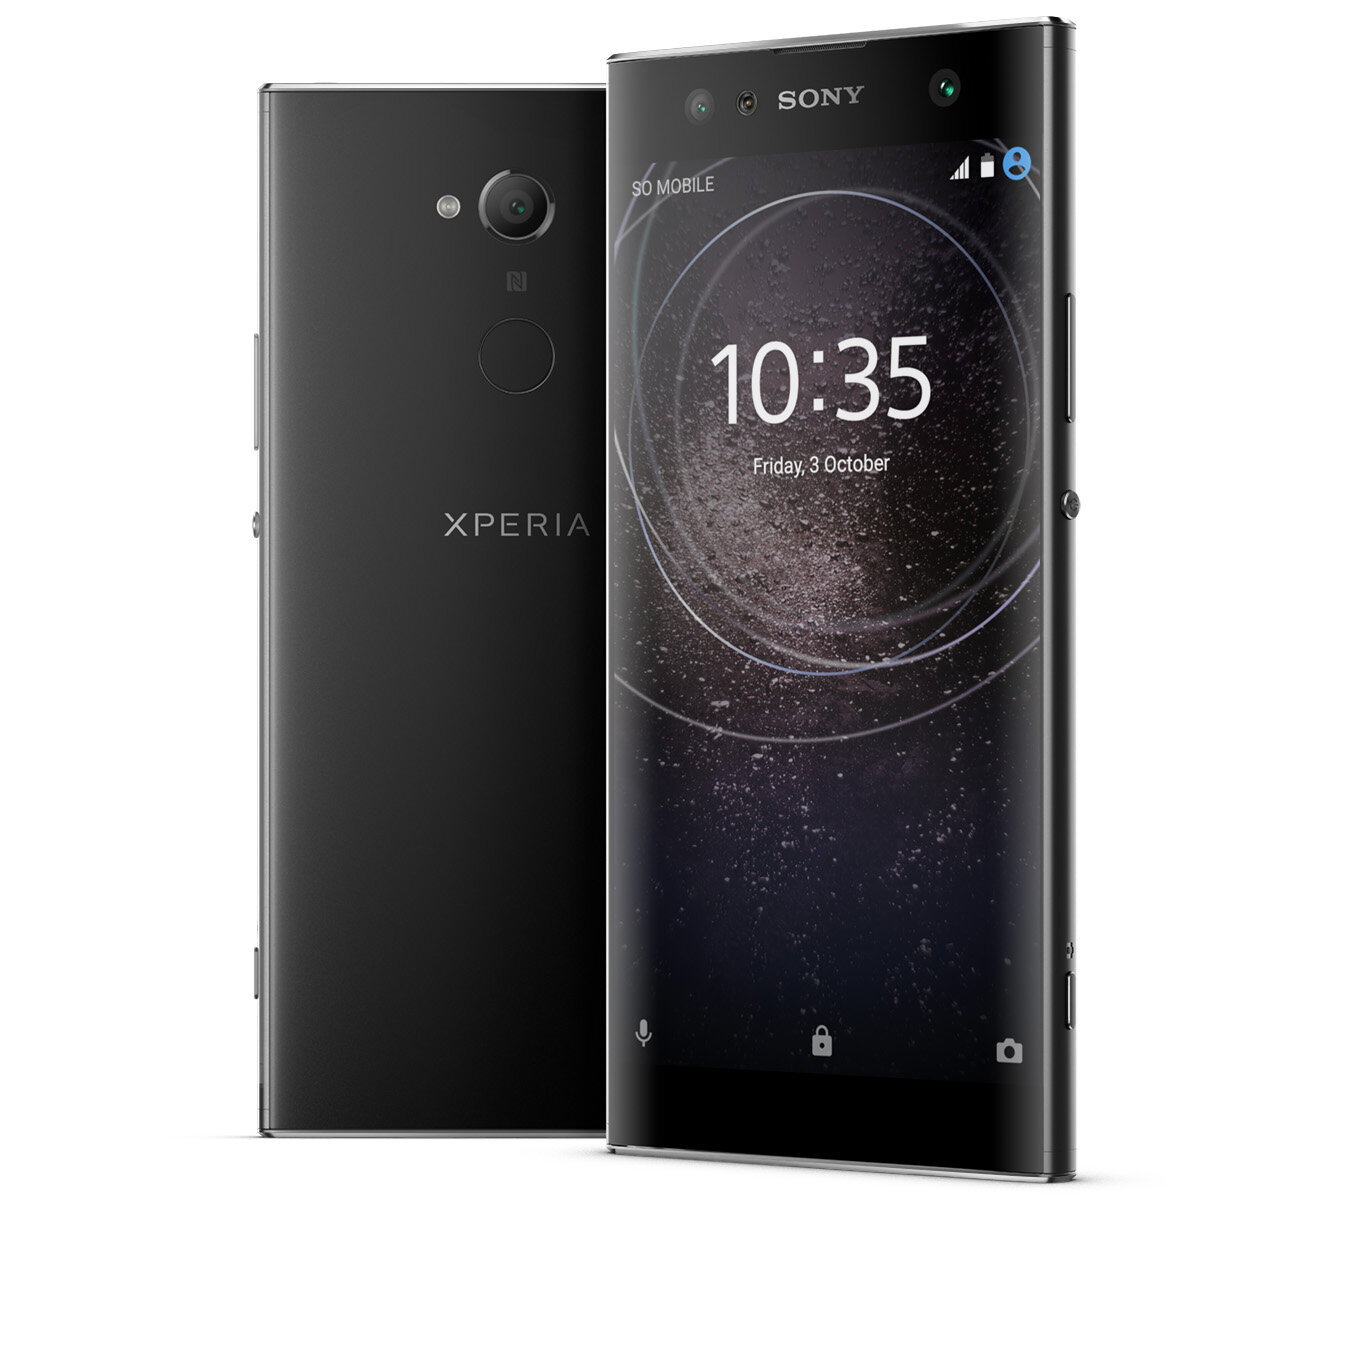 xperia-xa2-ultra-battery-status-issue-troubleshooting-and-solutions